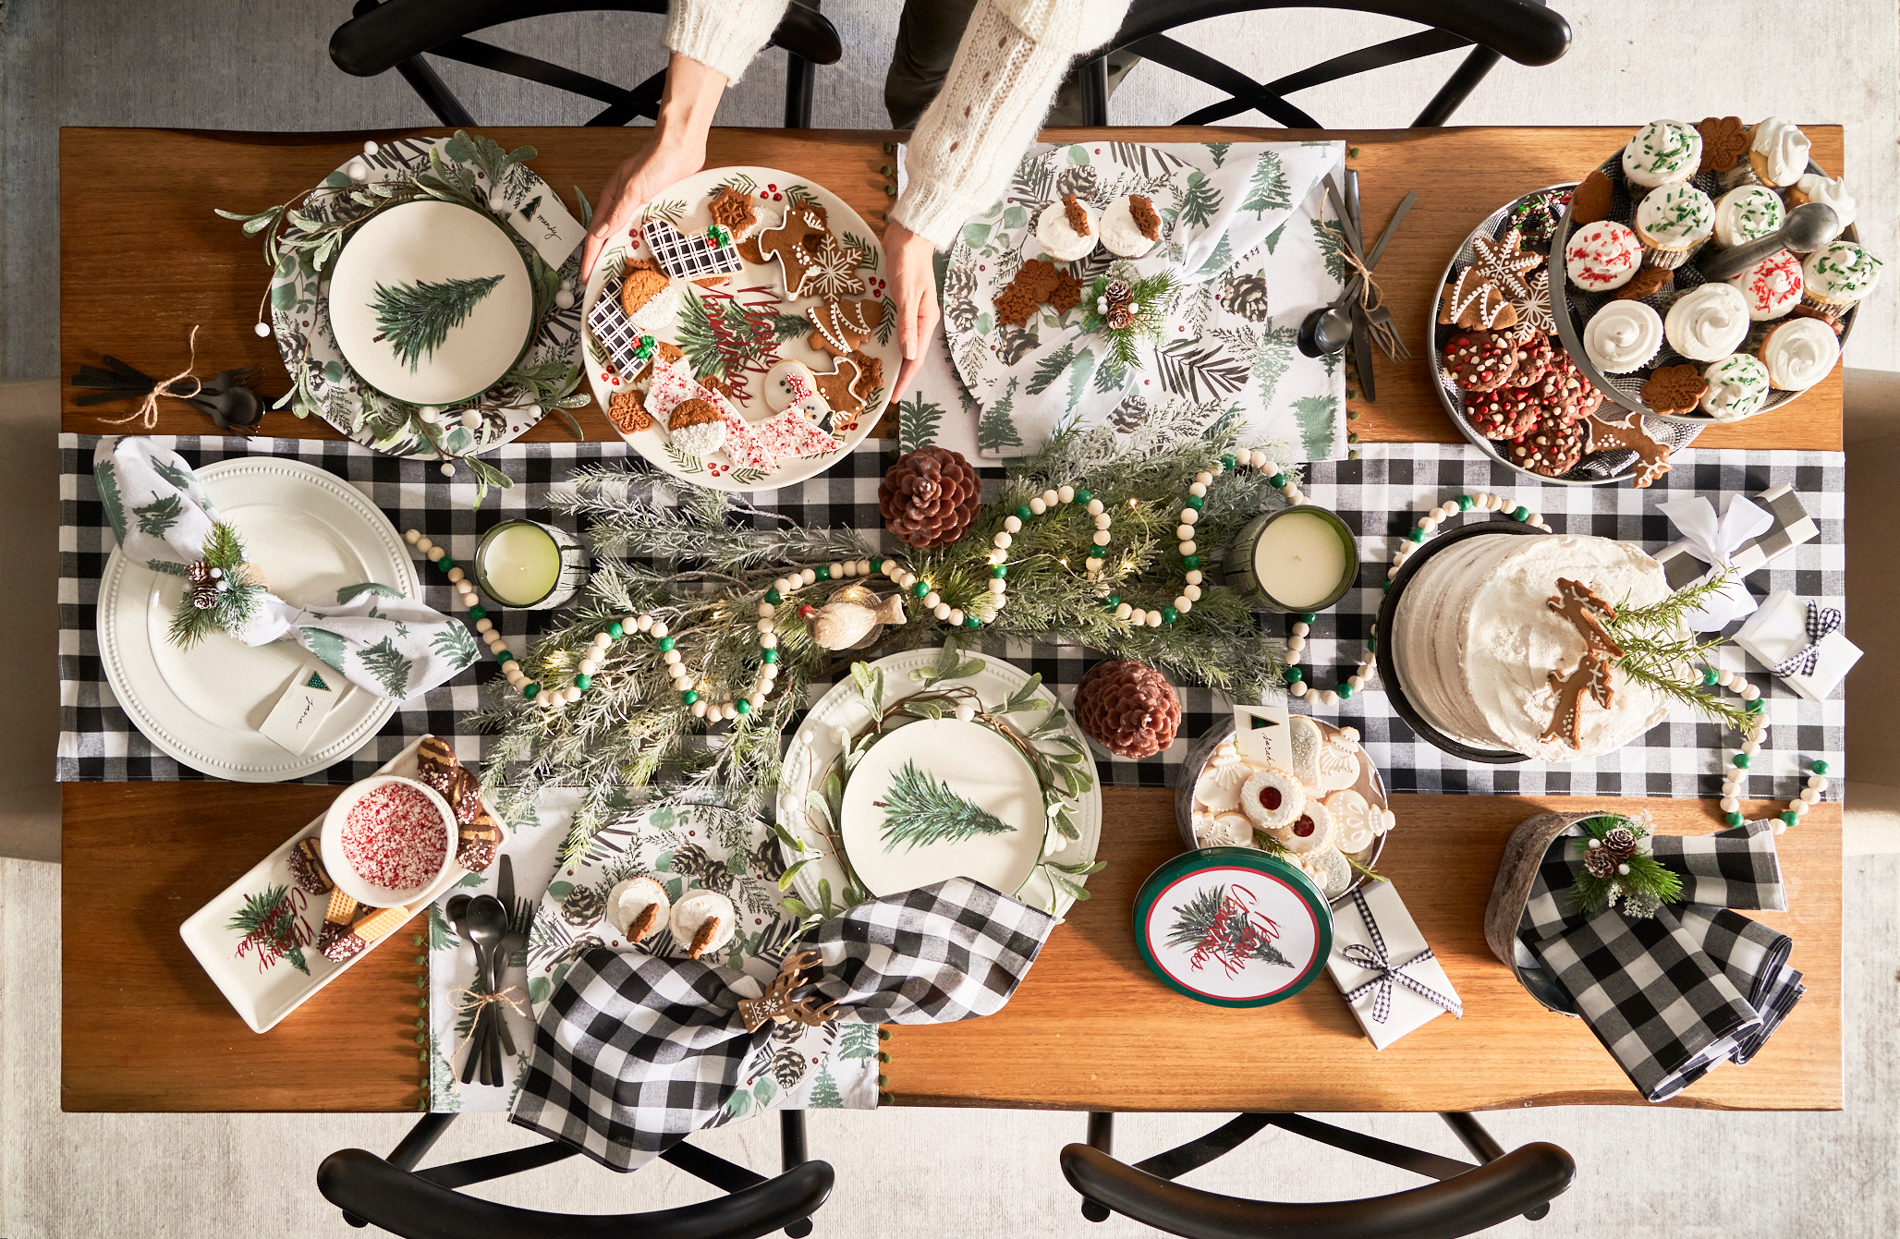 festive table spread of gingerbread holiday cake iced cookies candy alyssa wernick food stylist styling dallas tx